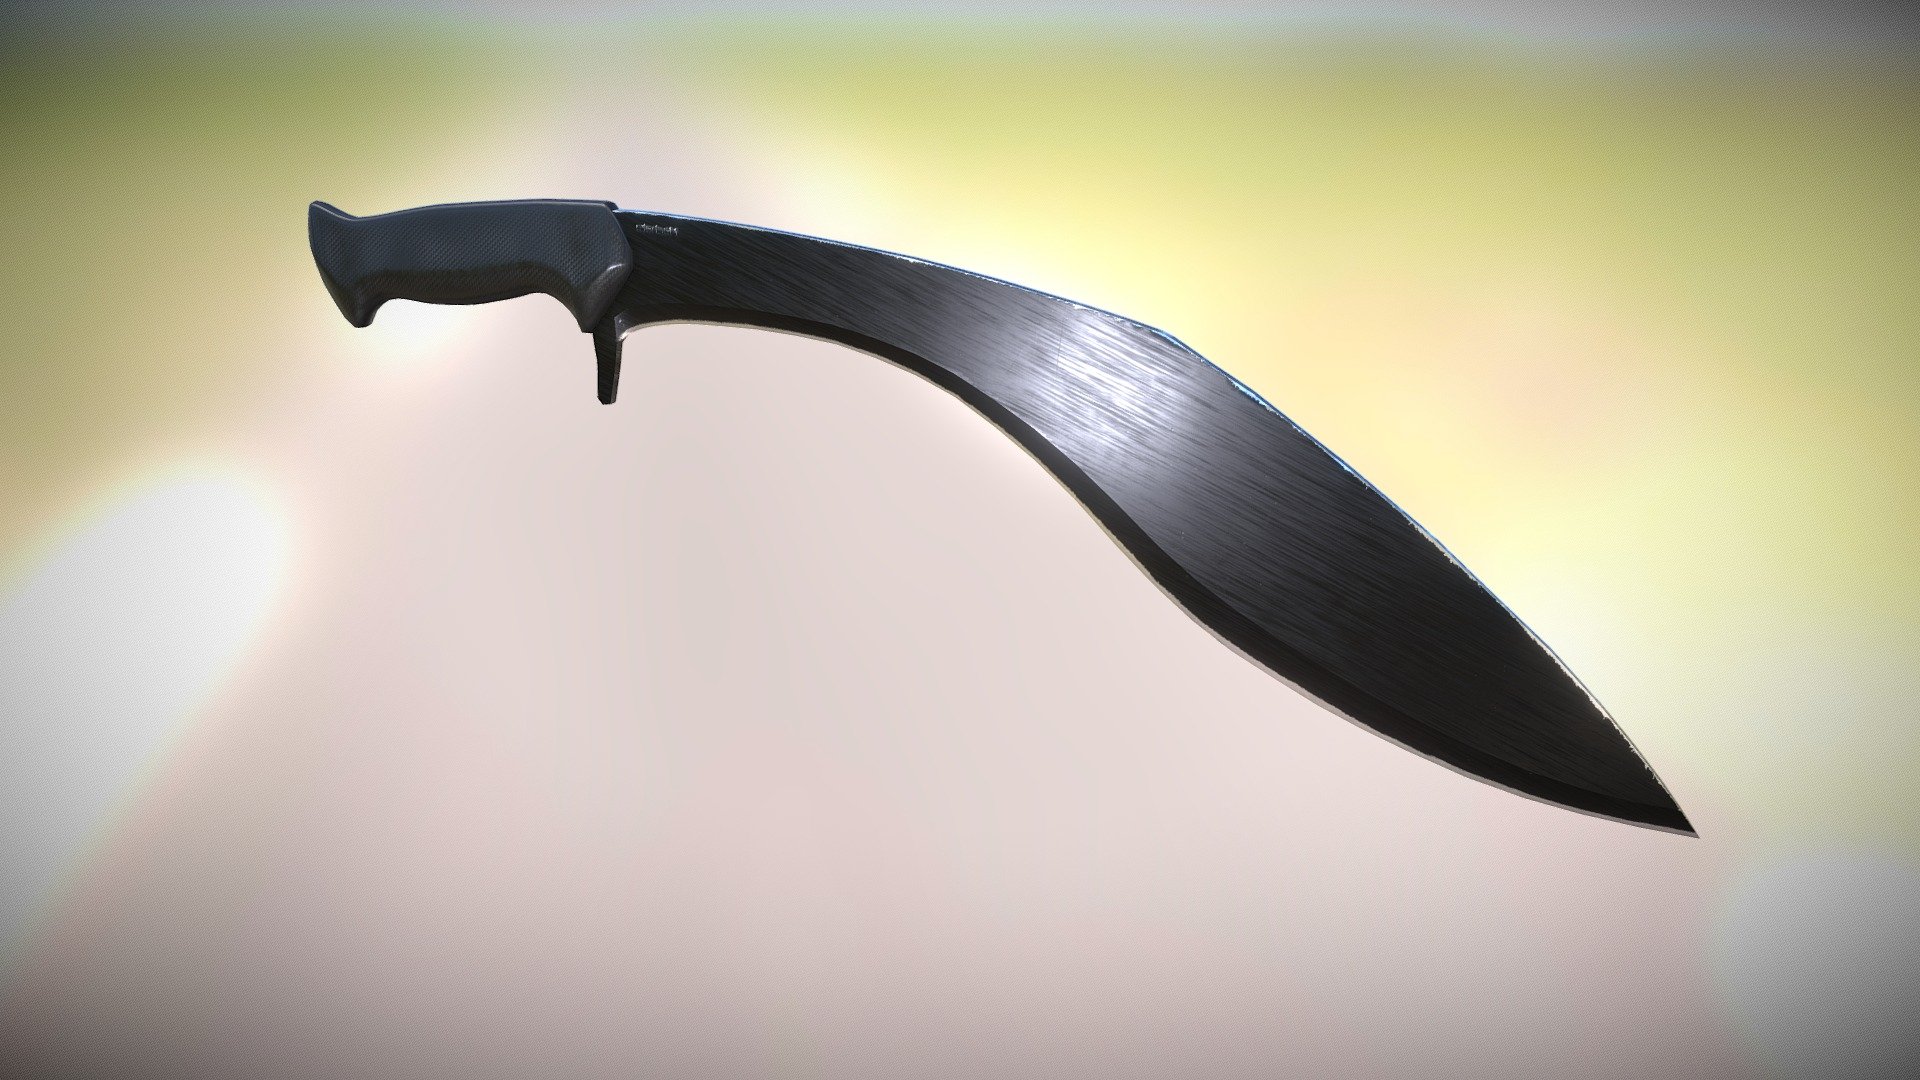 A used Kukri machete. GameReady - Vr Ready. Pbr.

This is part of the Melee Weapons Pack 3d model